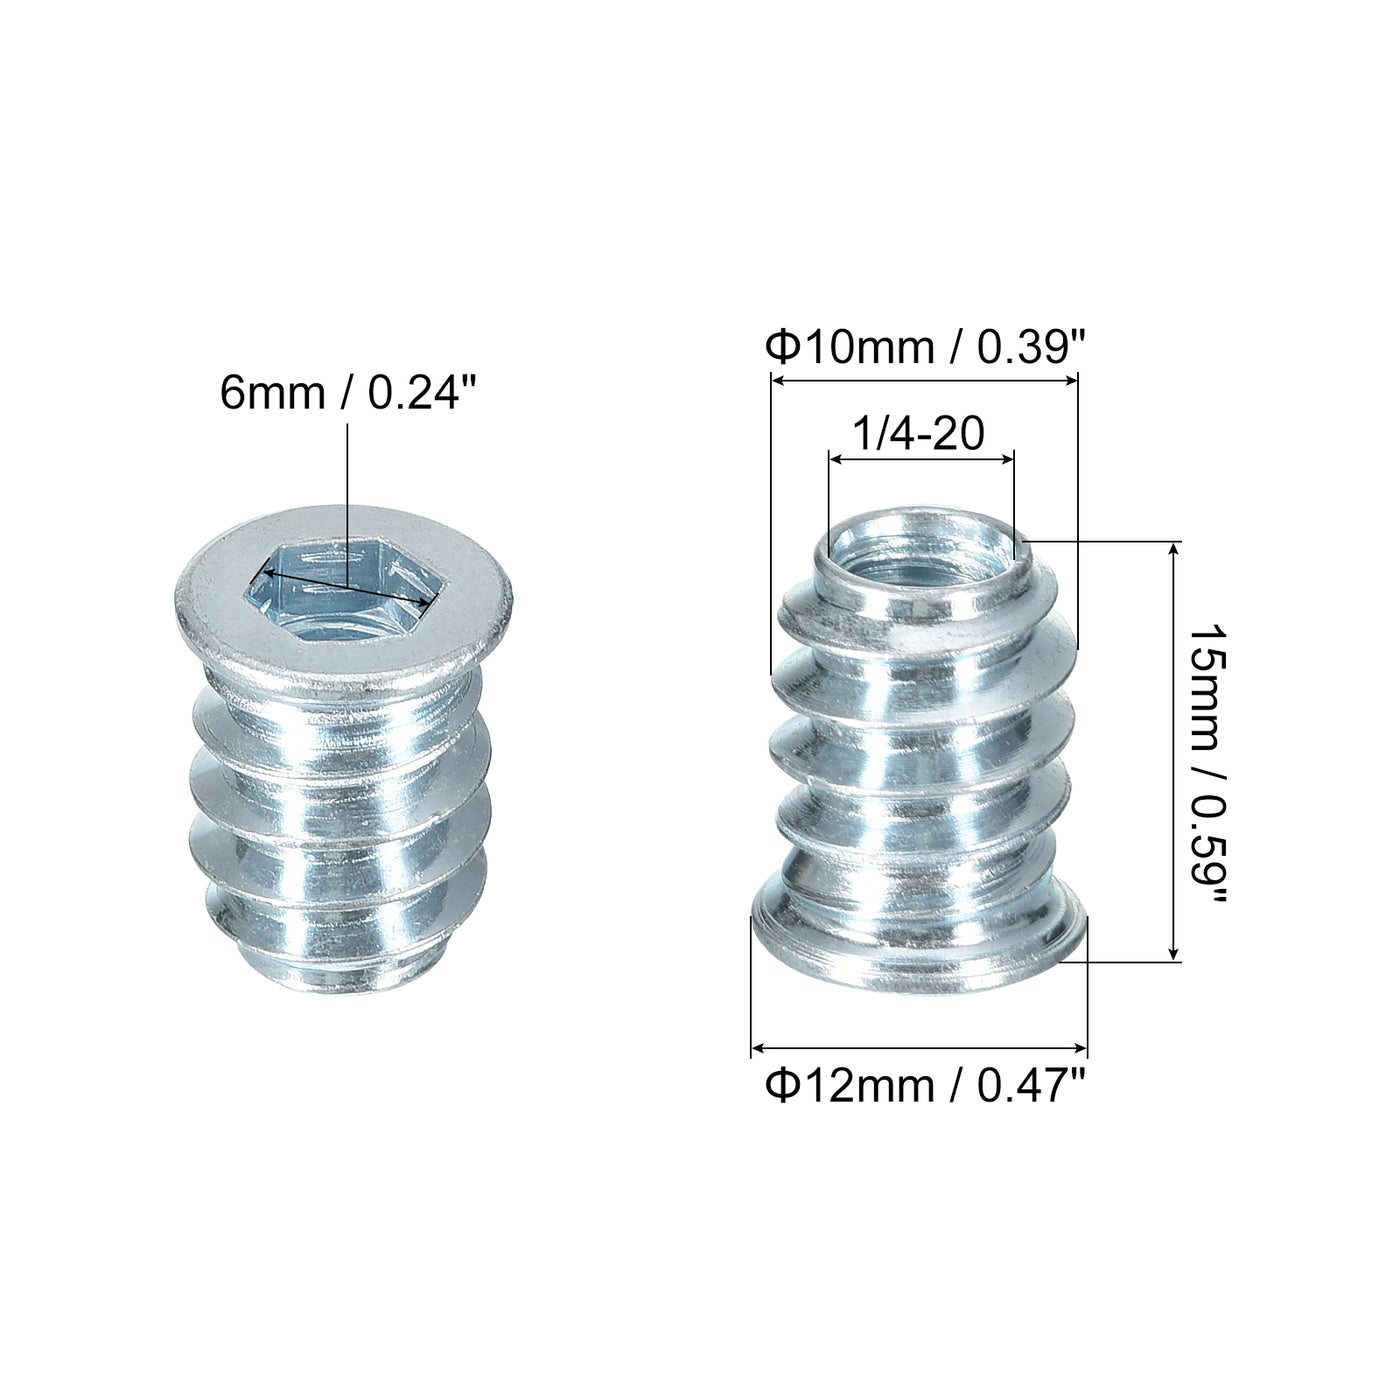 uxcell Uxcell Threaded Inserts Nuts, Threaded Inserts for Wood Furniture, Wood Insert Nuts with Hex Wrench